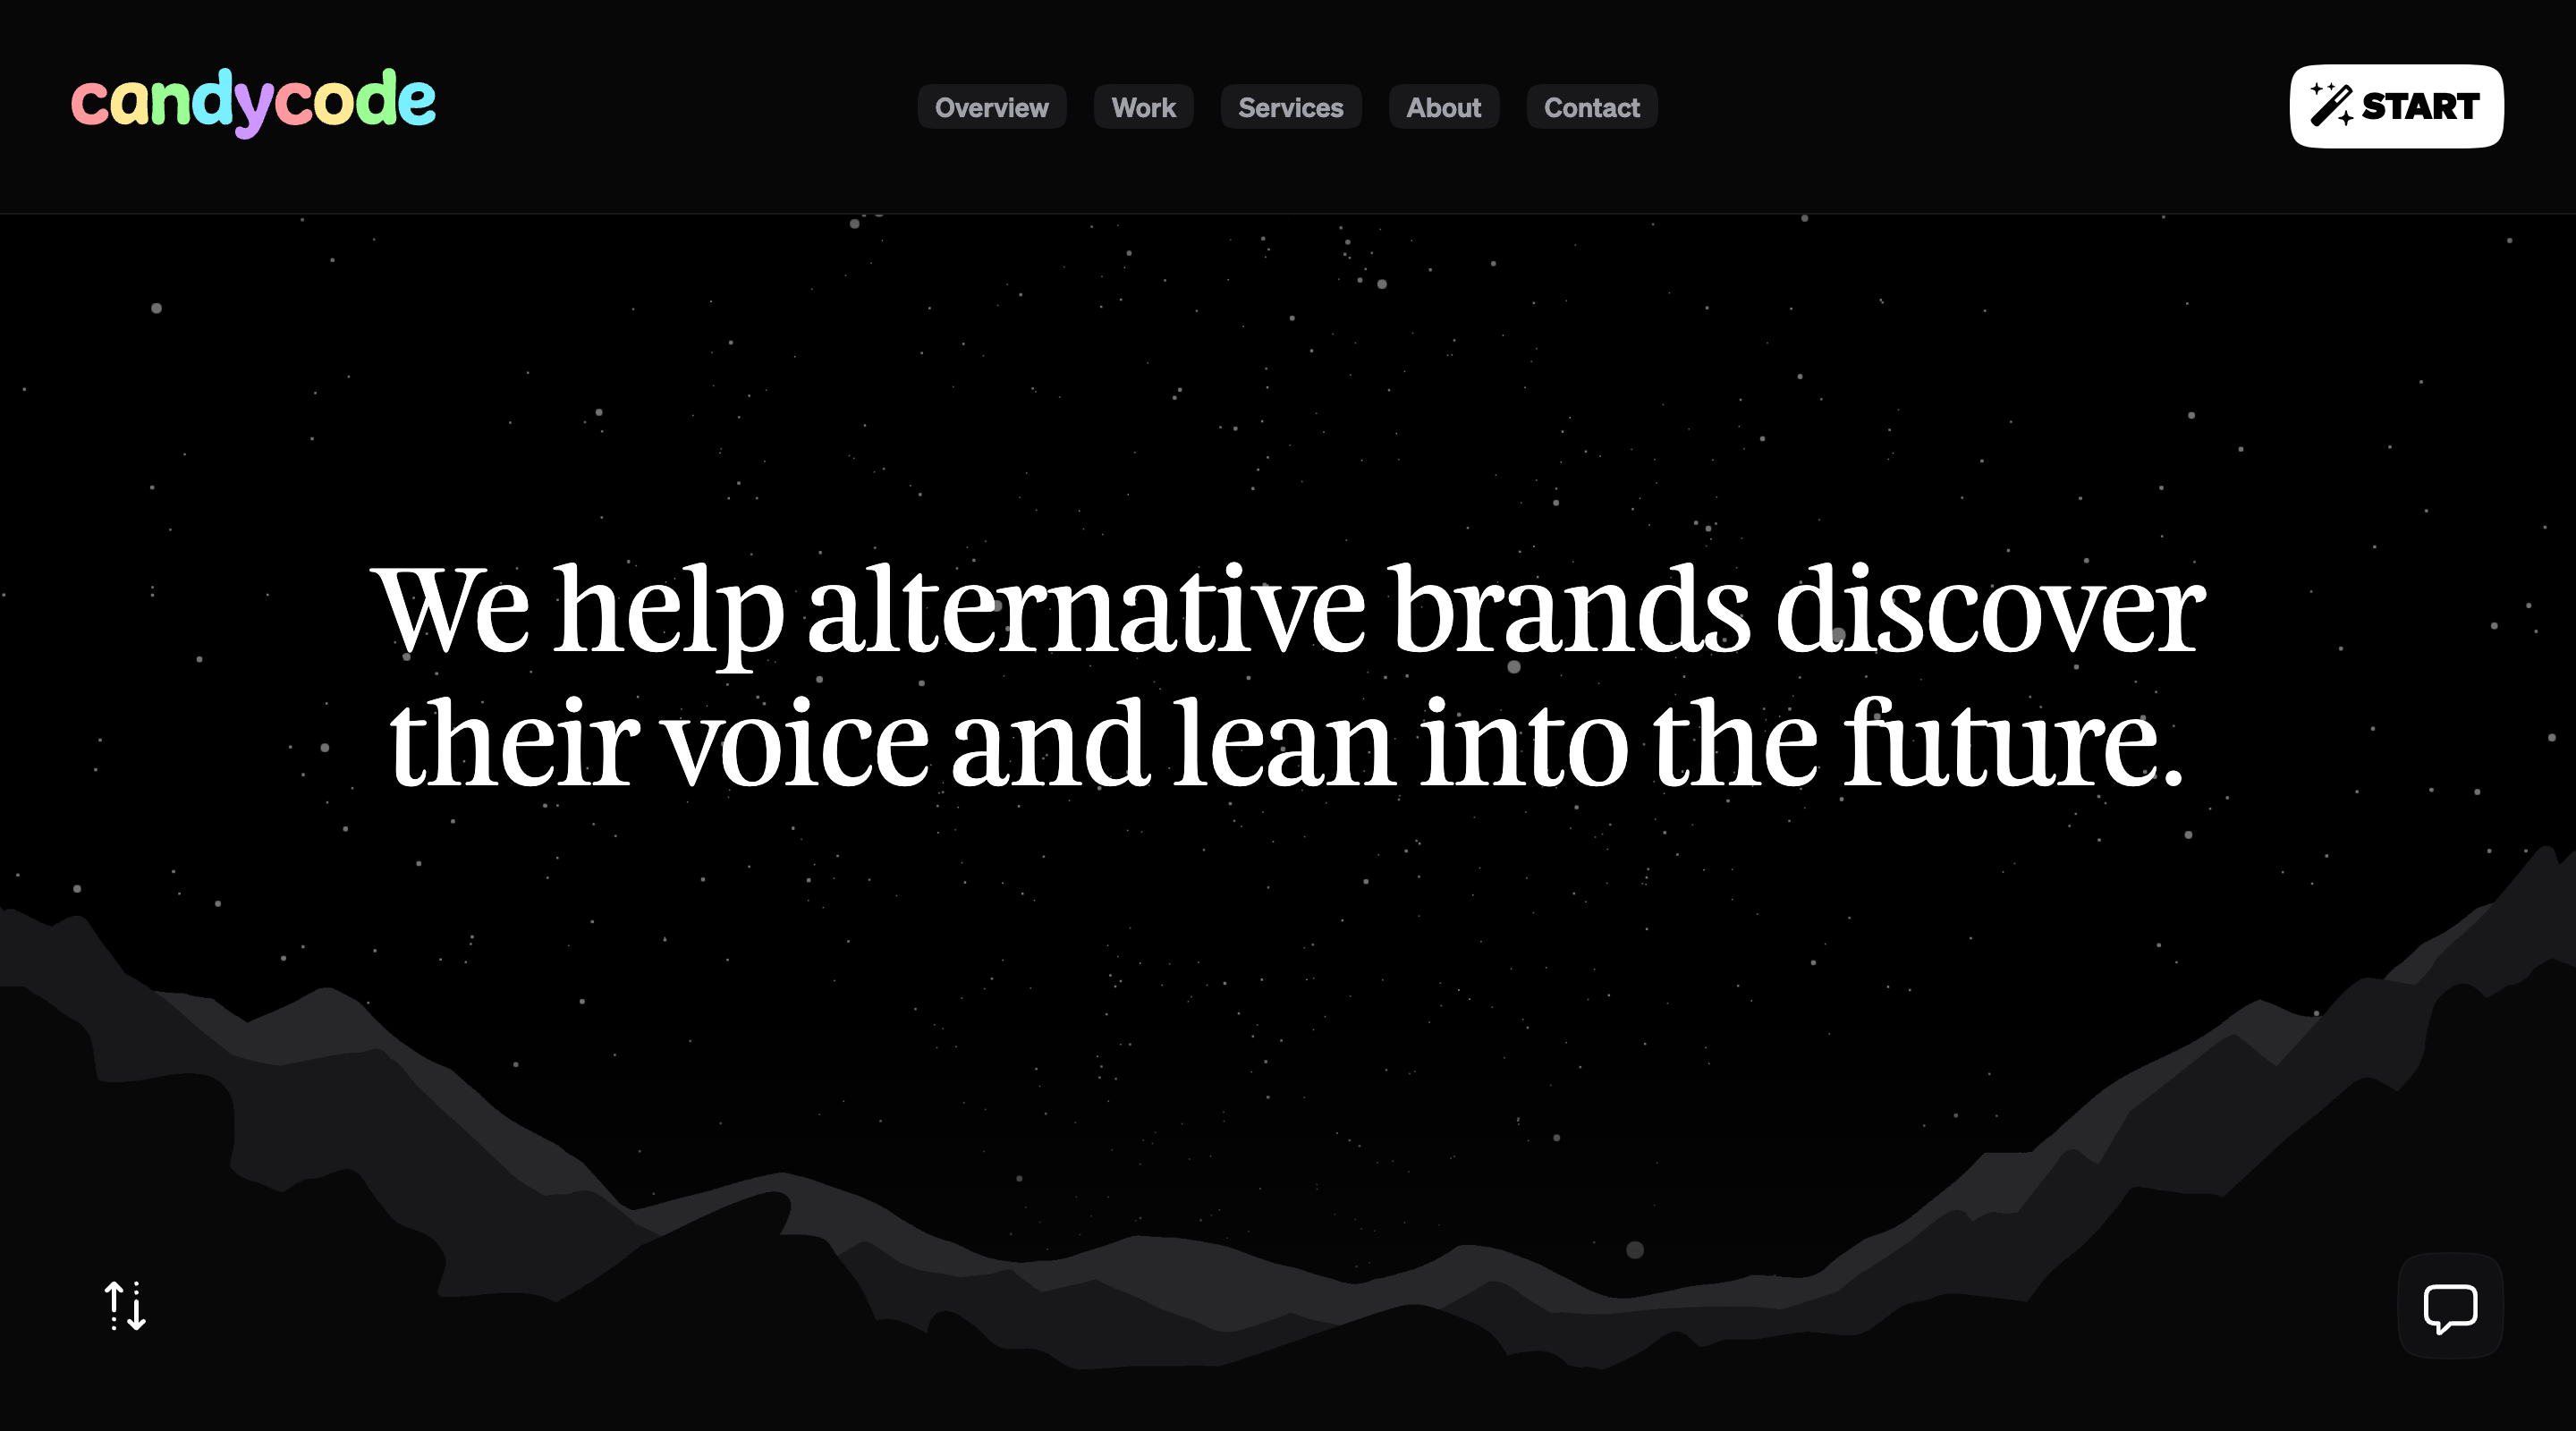 Screenshot of the candycode homepage hero. A large headline in the middle of the screen says, "We help alternative brands discover their voice and lean into the future." The background is a starry night sky with a mountain range showing at the bottom of the hero. The header has the candycode logo, a site menu, and a button with a wand next to the word "Start" on it.